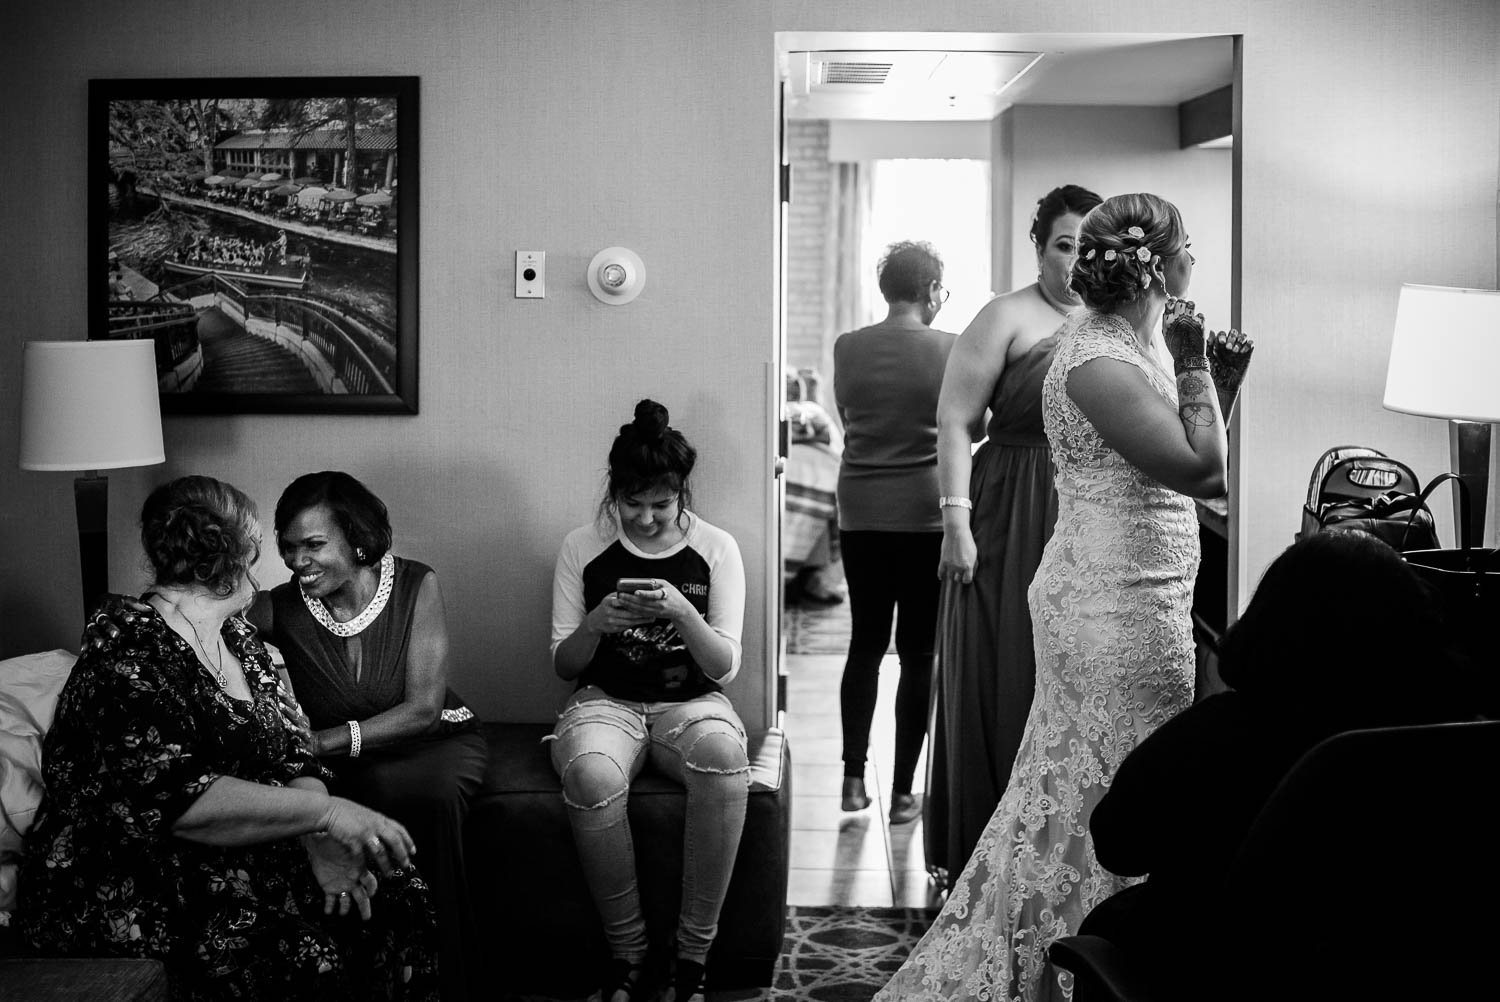 Mothers of the bride and groom share a story as bride look in mirror at Drury Inn San Antonio Texas